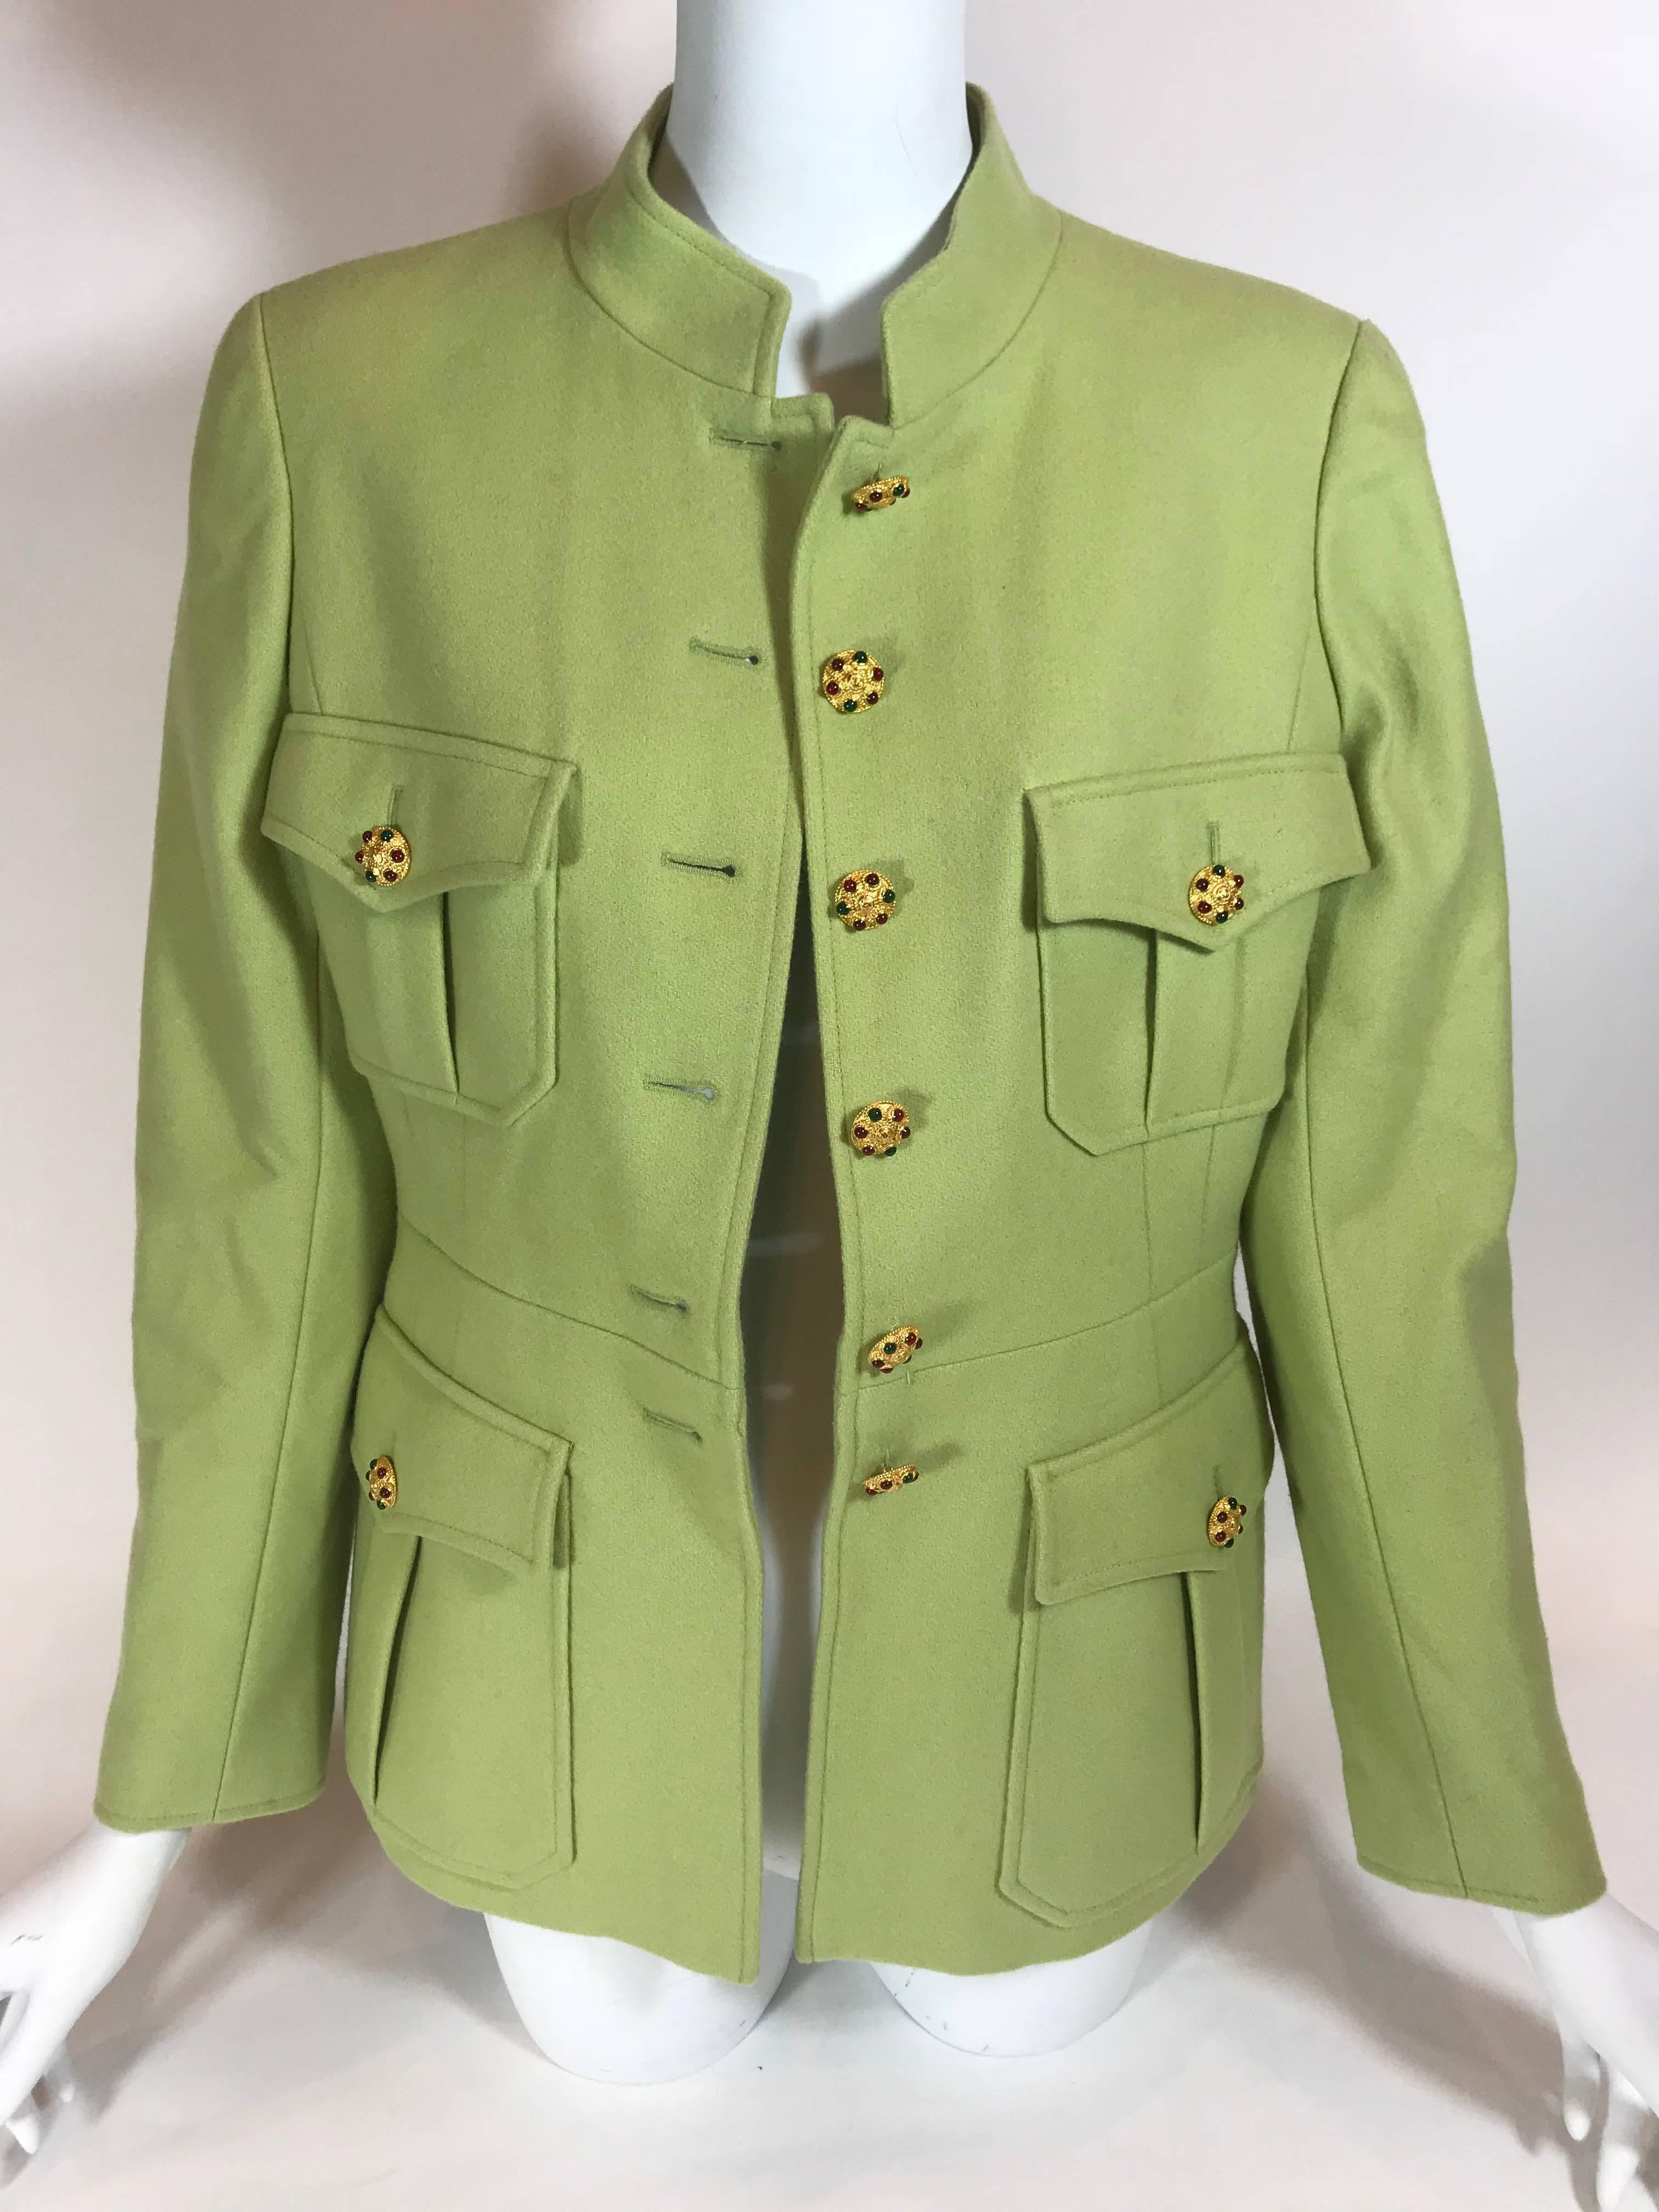 Bright green wool. Gold-tone hardware. Button up closure. Four exterior Military style pockets. Collared. Three button up closures on sleeves. 